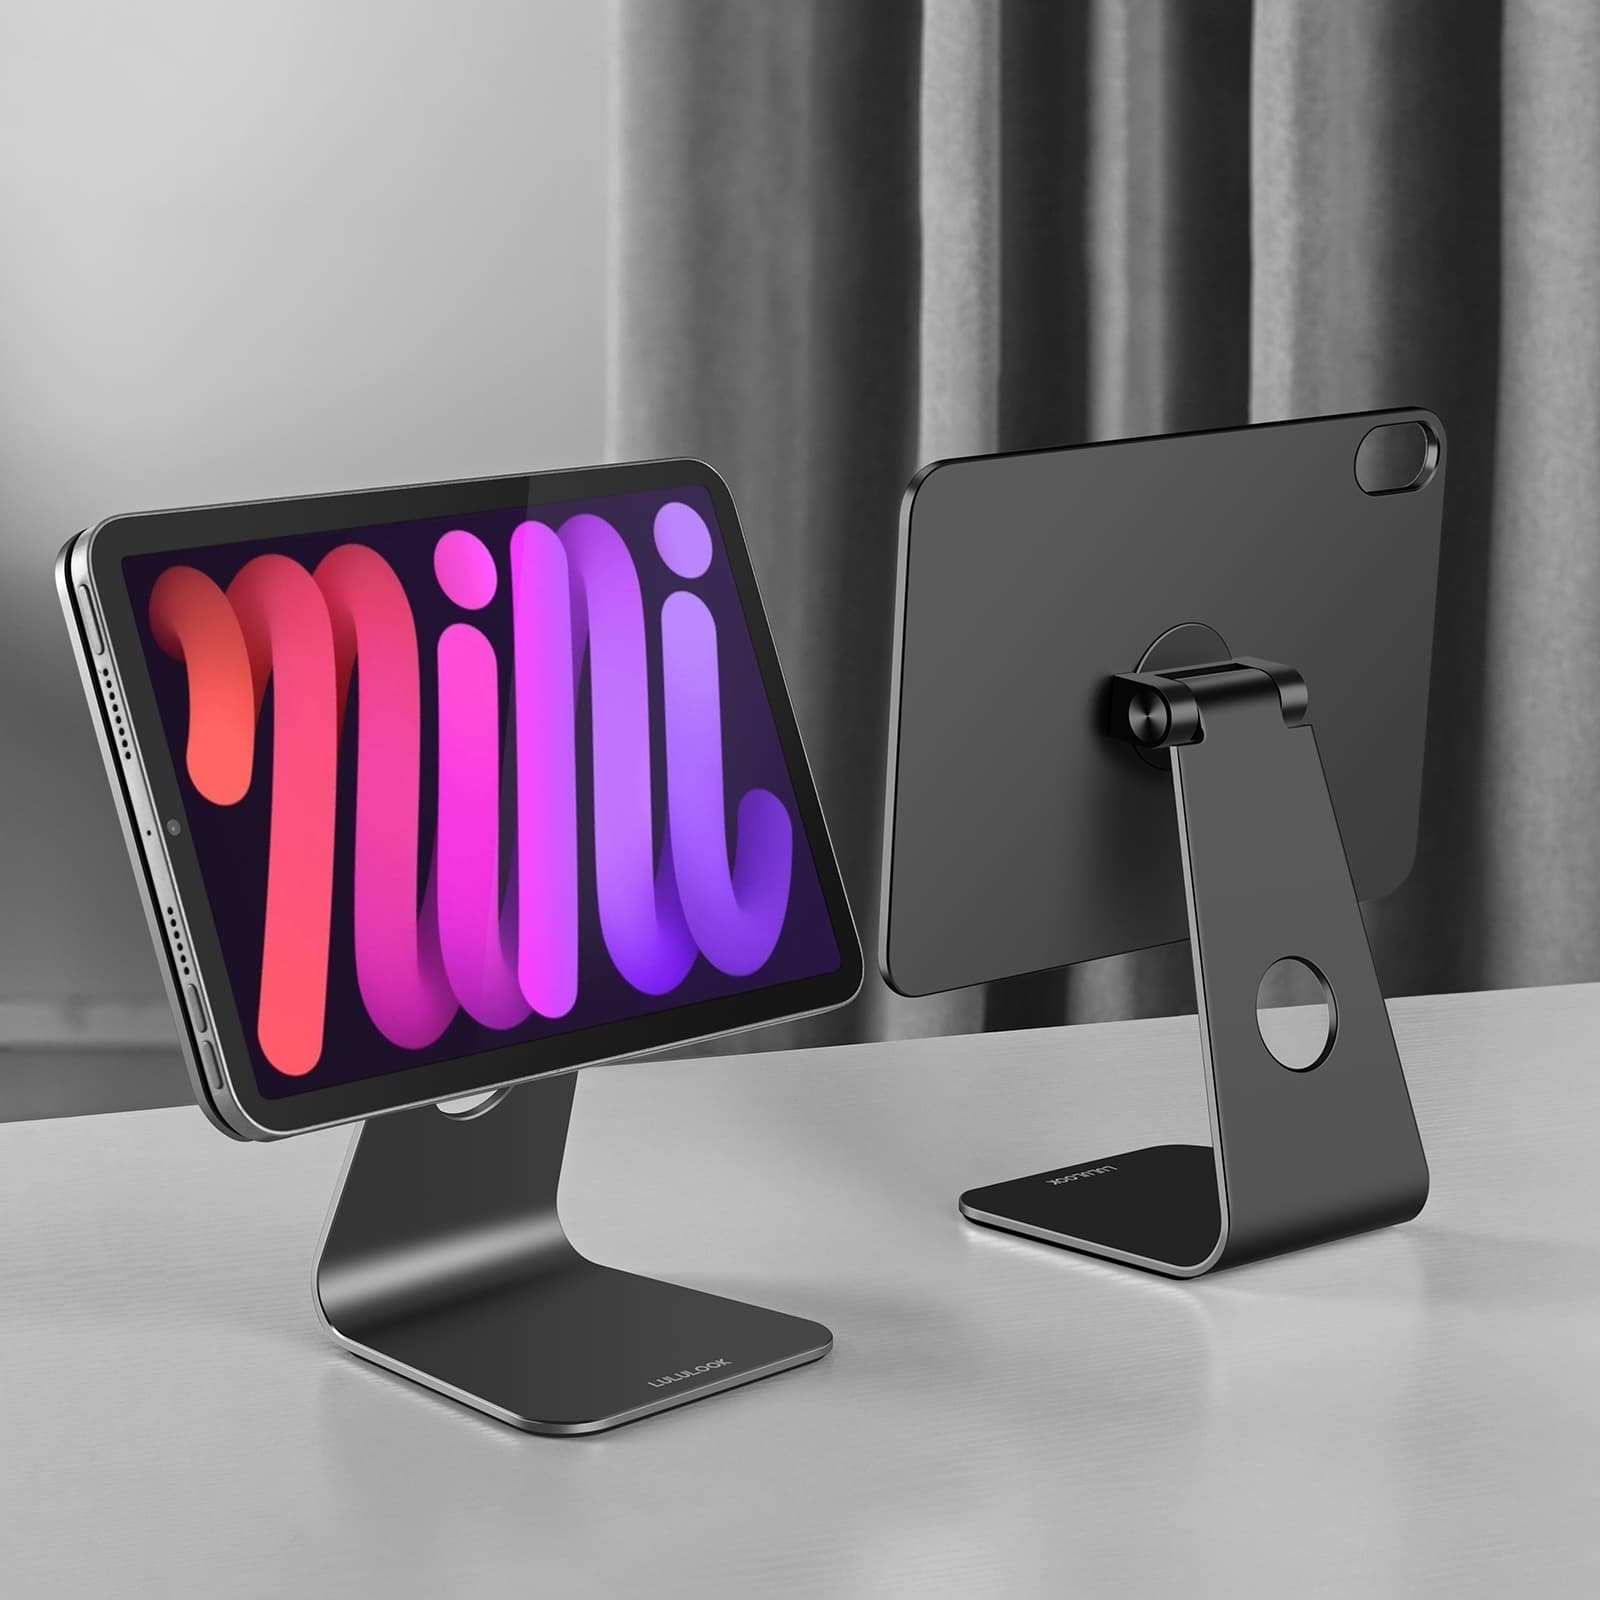 Win an iPad mini 6 magnetic stand from Lululook [Cult of Mac Giveaway]